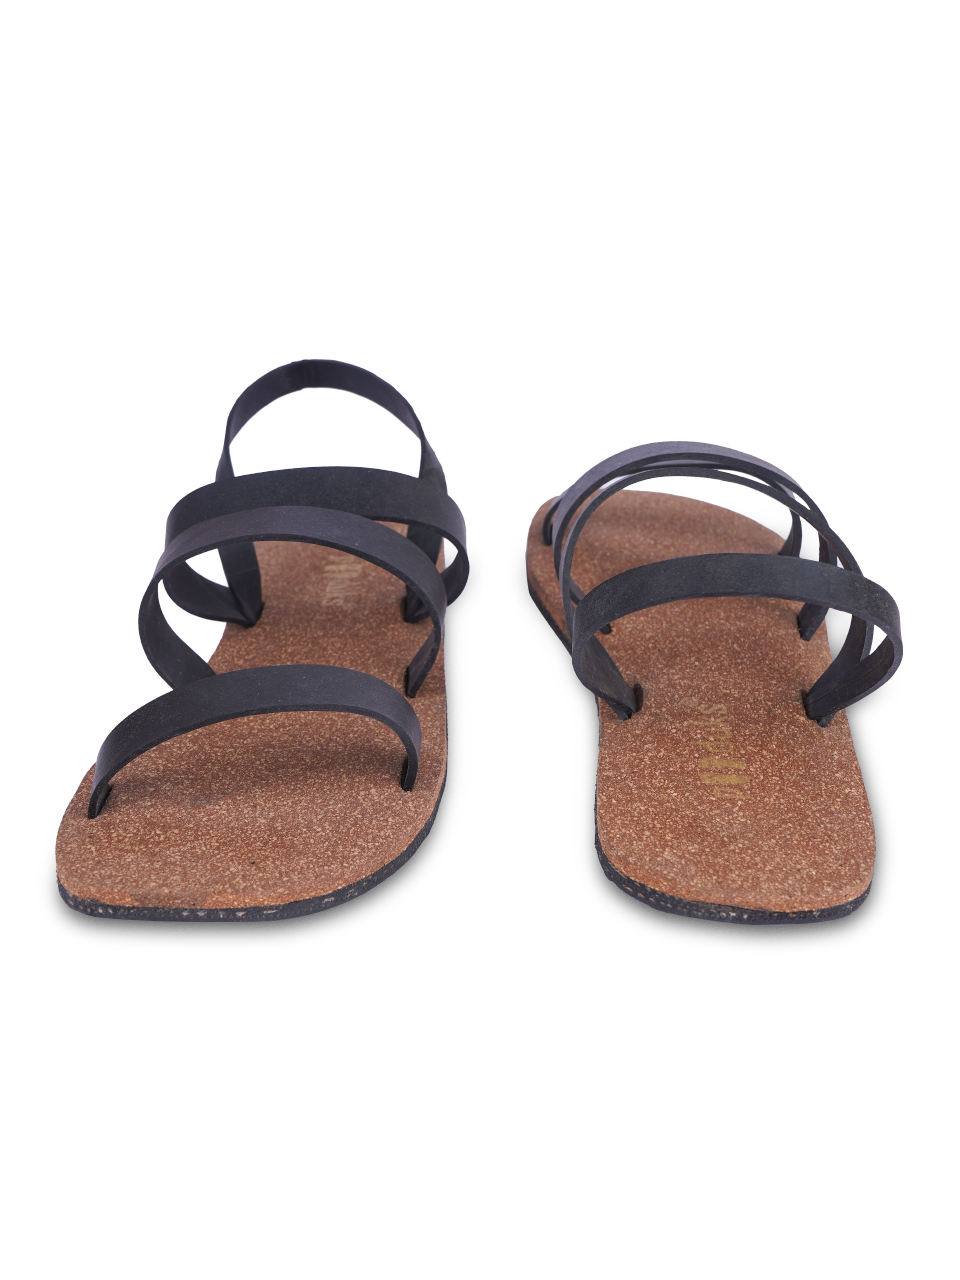 Product: Paaduks Solid Black Roob Sandals For Women